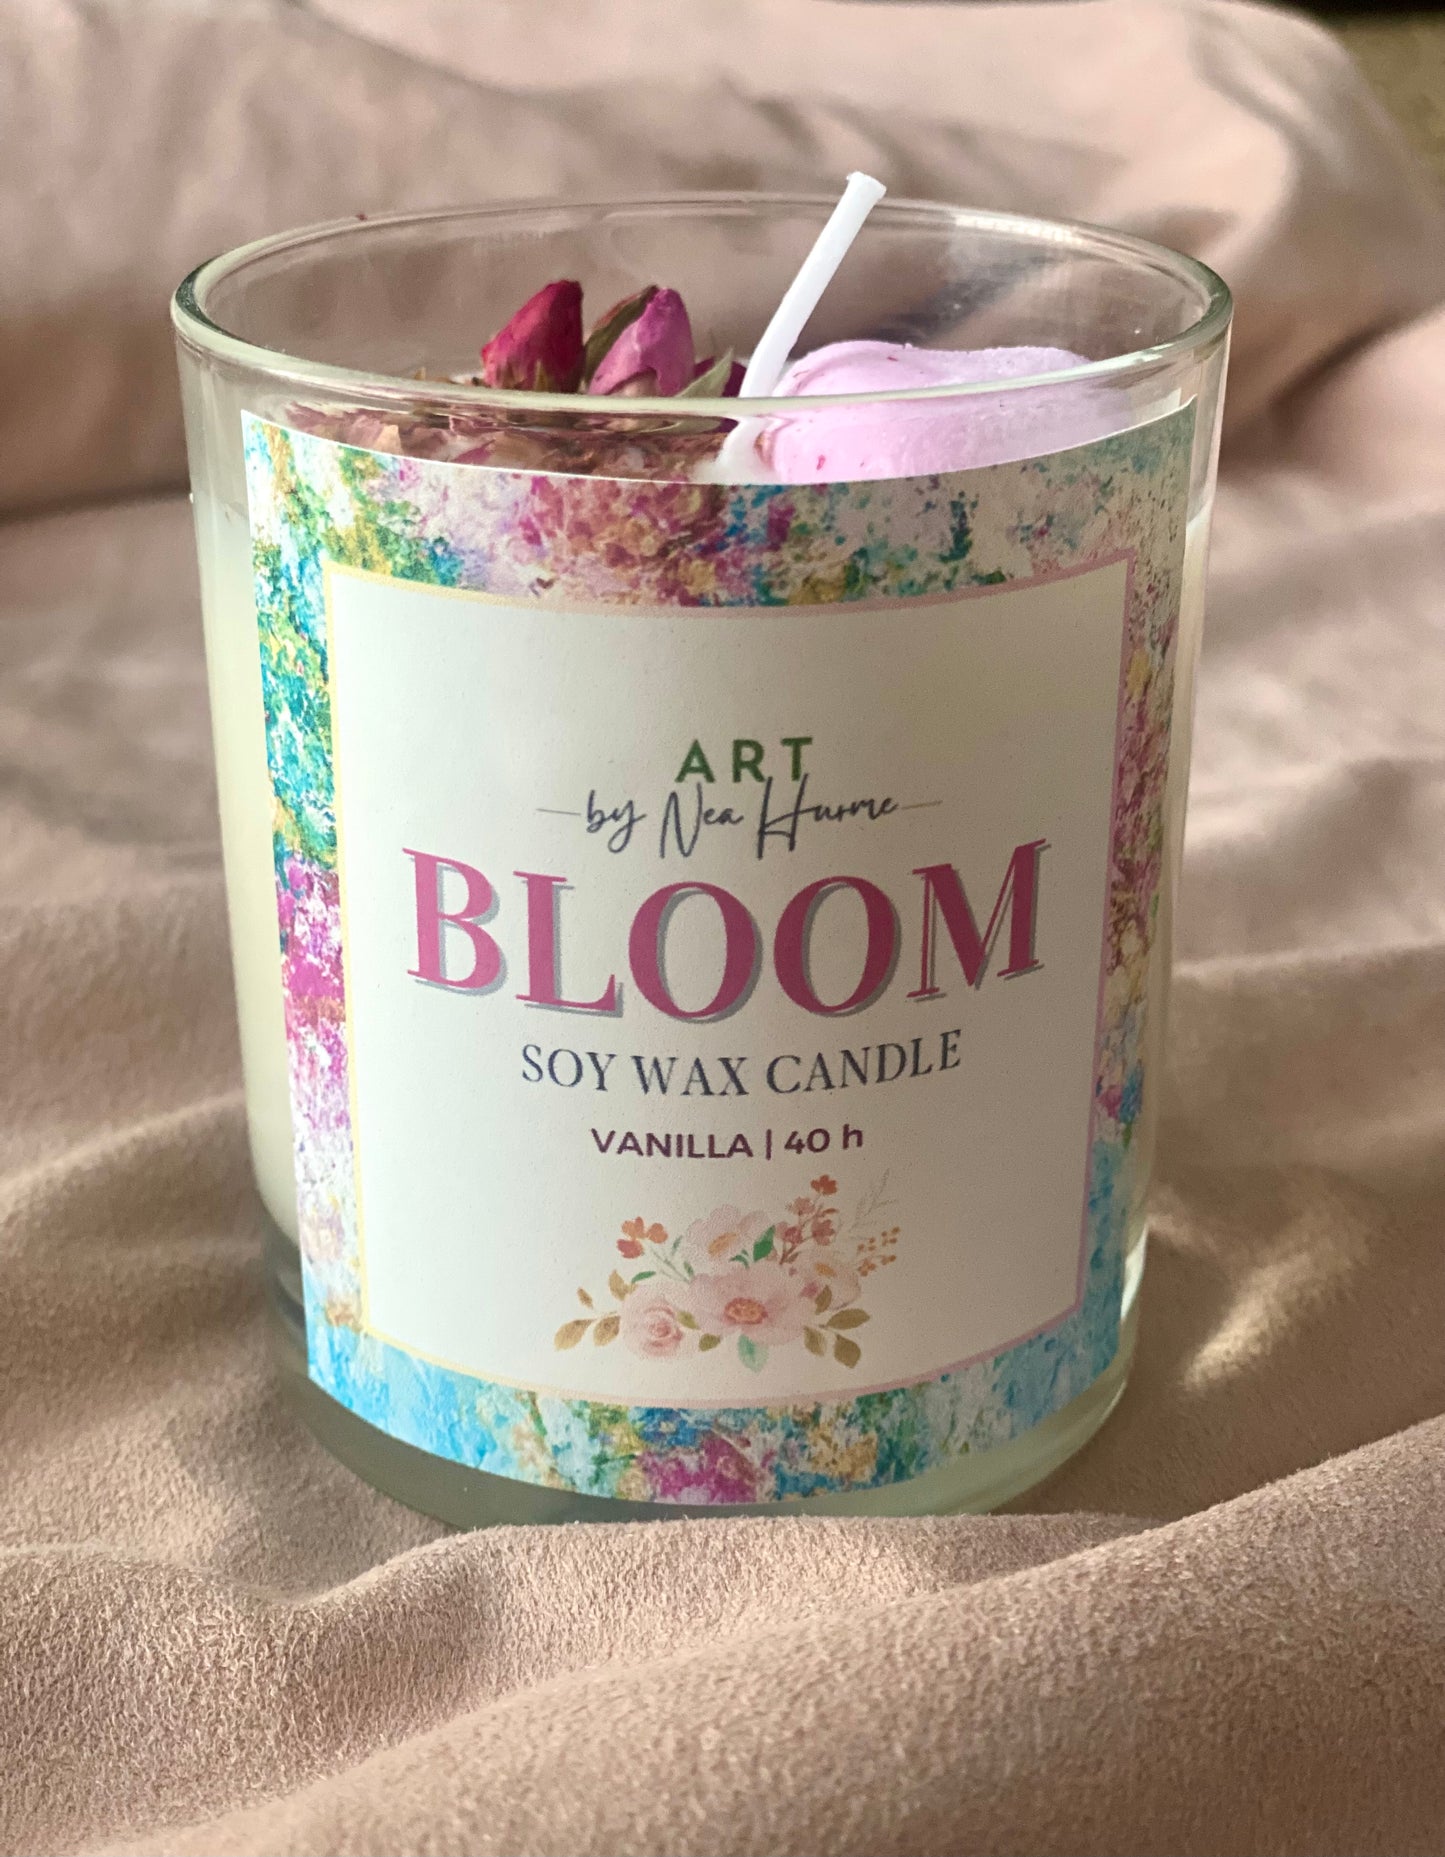 ”Bloom” soy wax candle